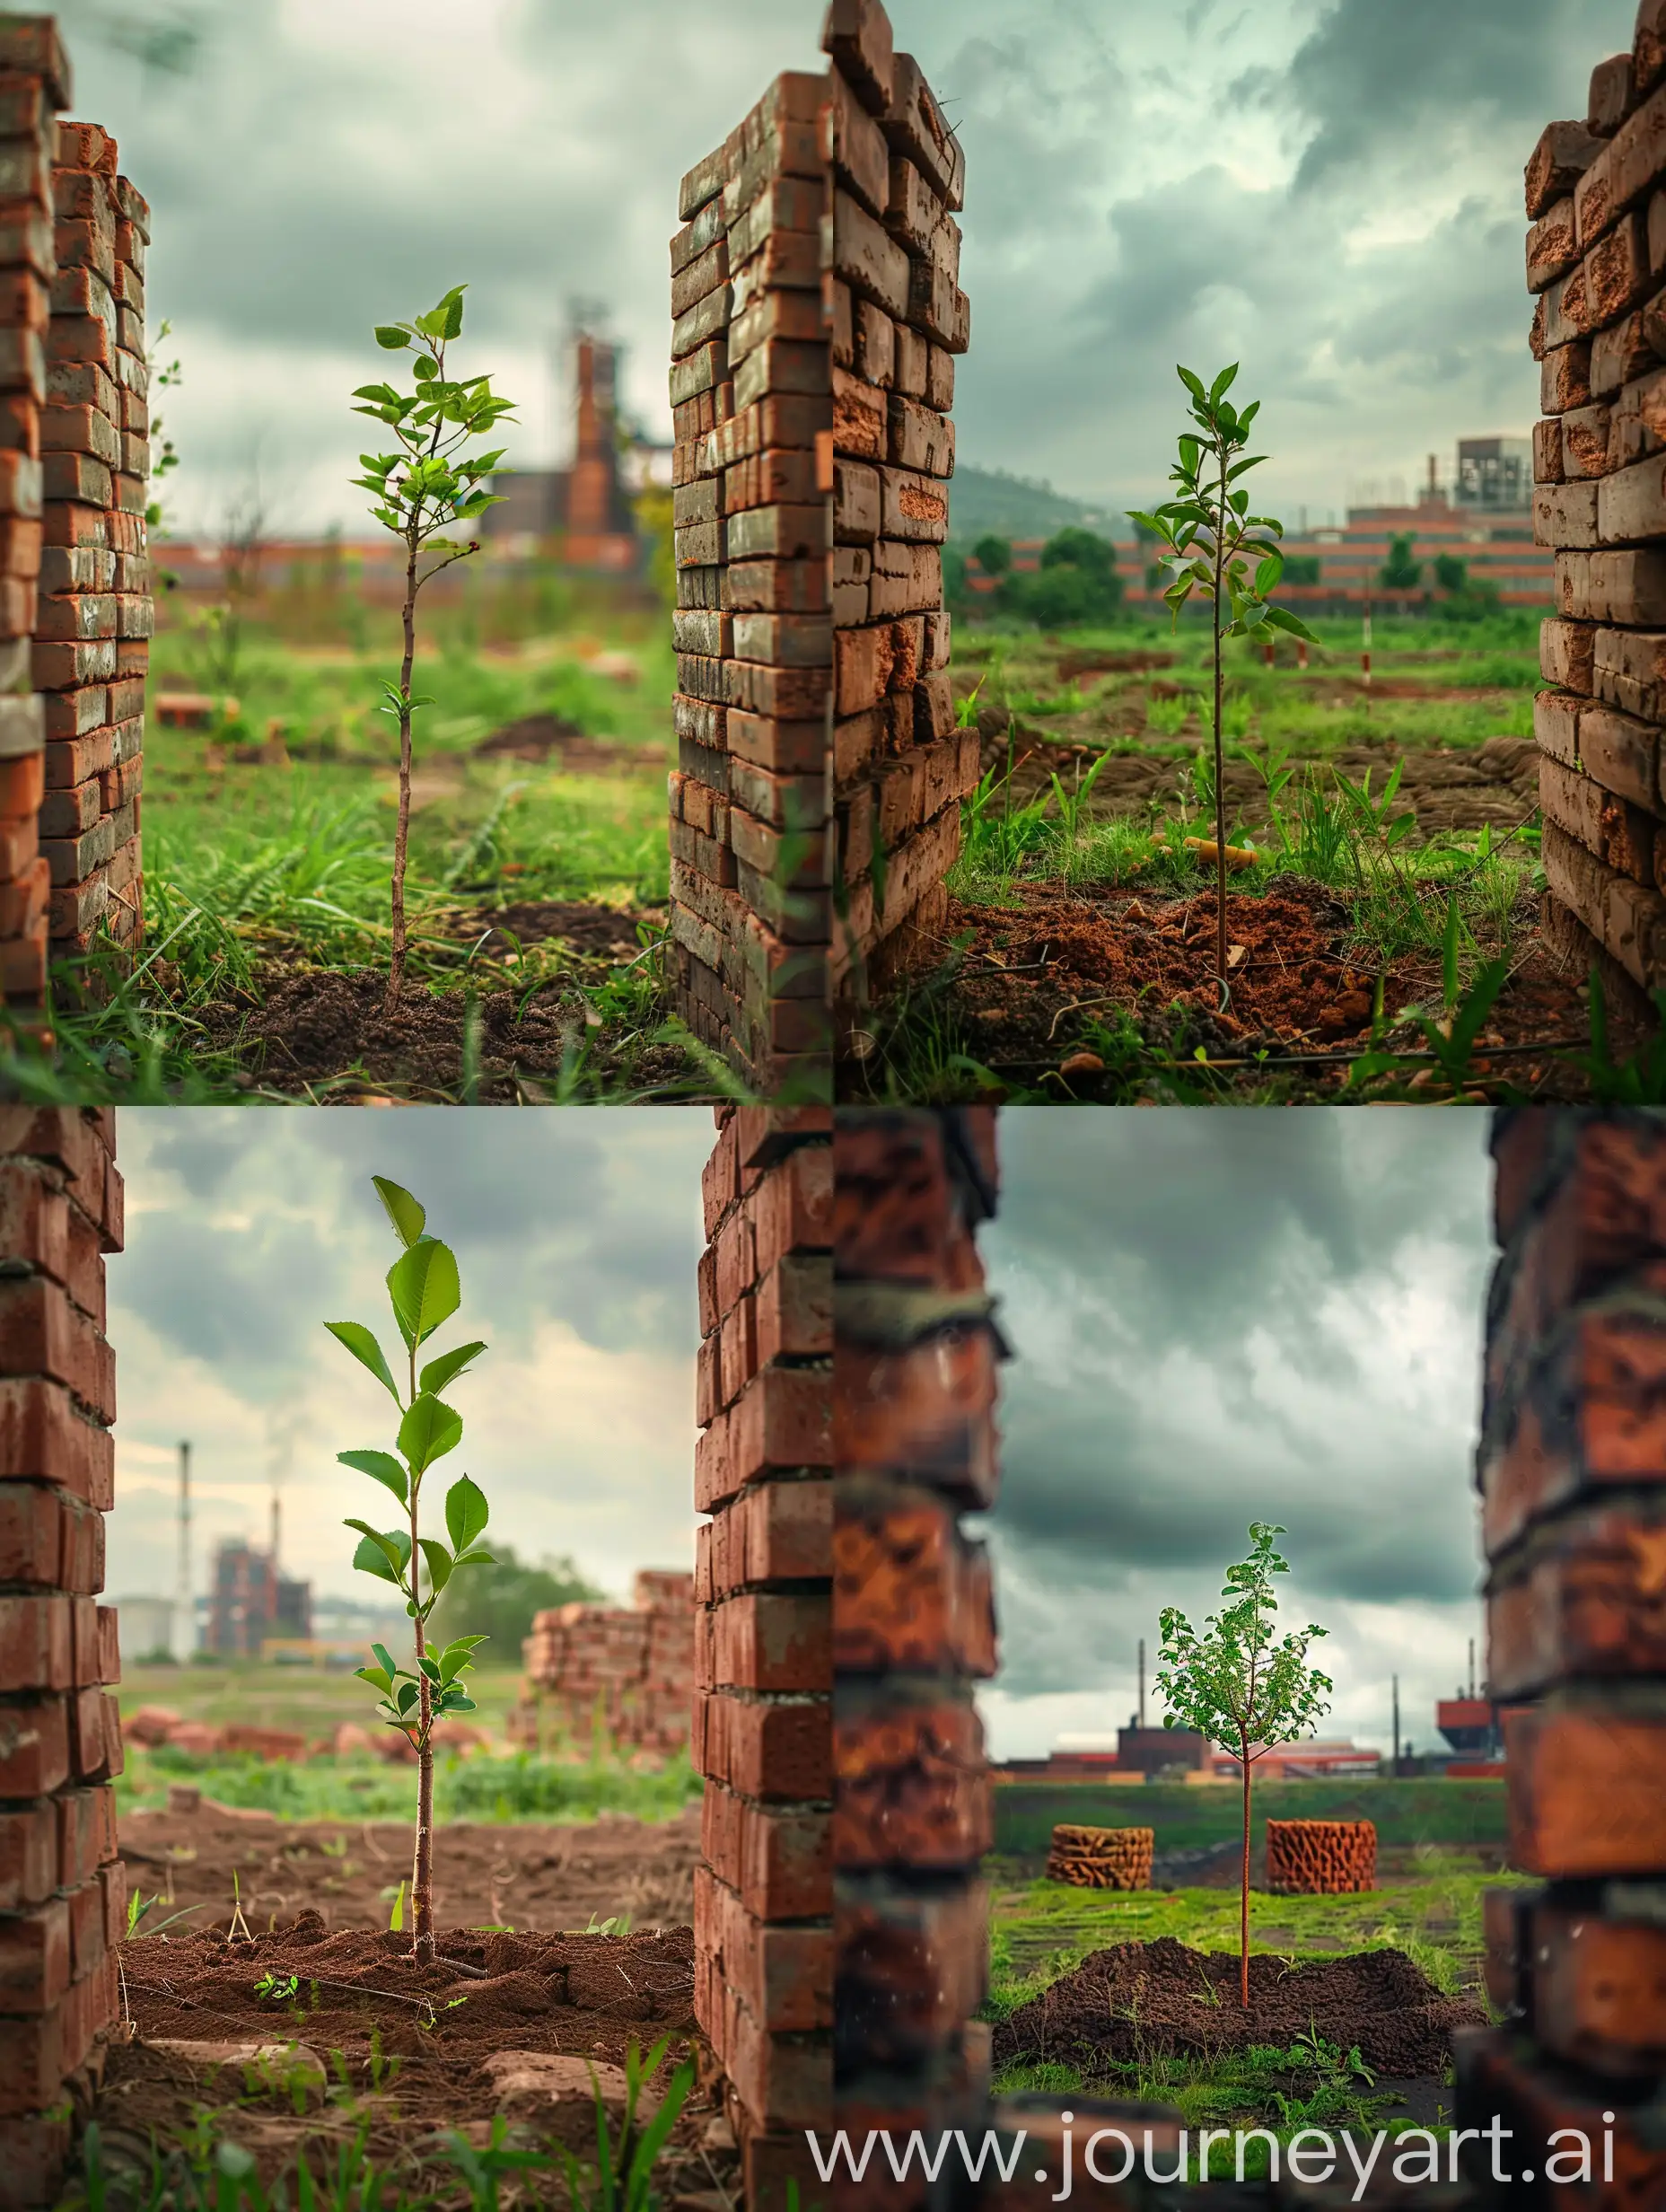 Lush-Green-Landscape-with-Brick-Factory-and-Sapling-in-Cloudy-Weather